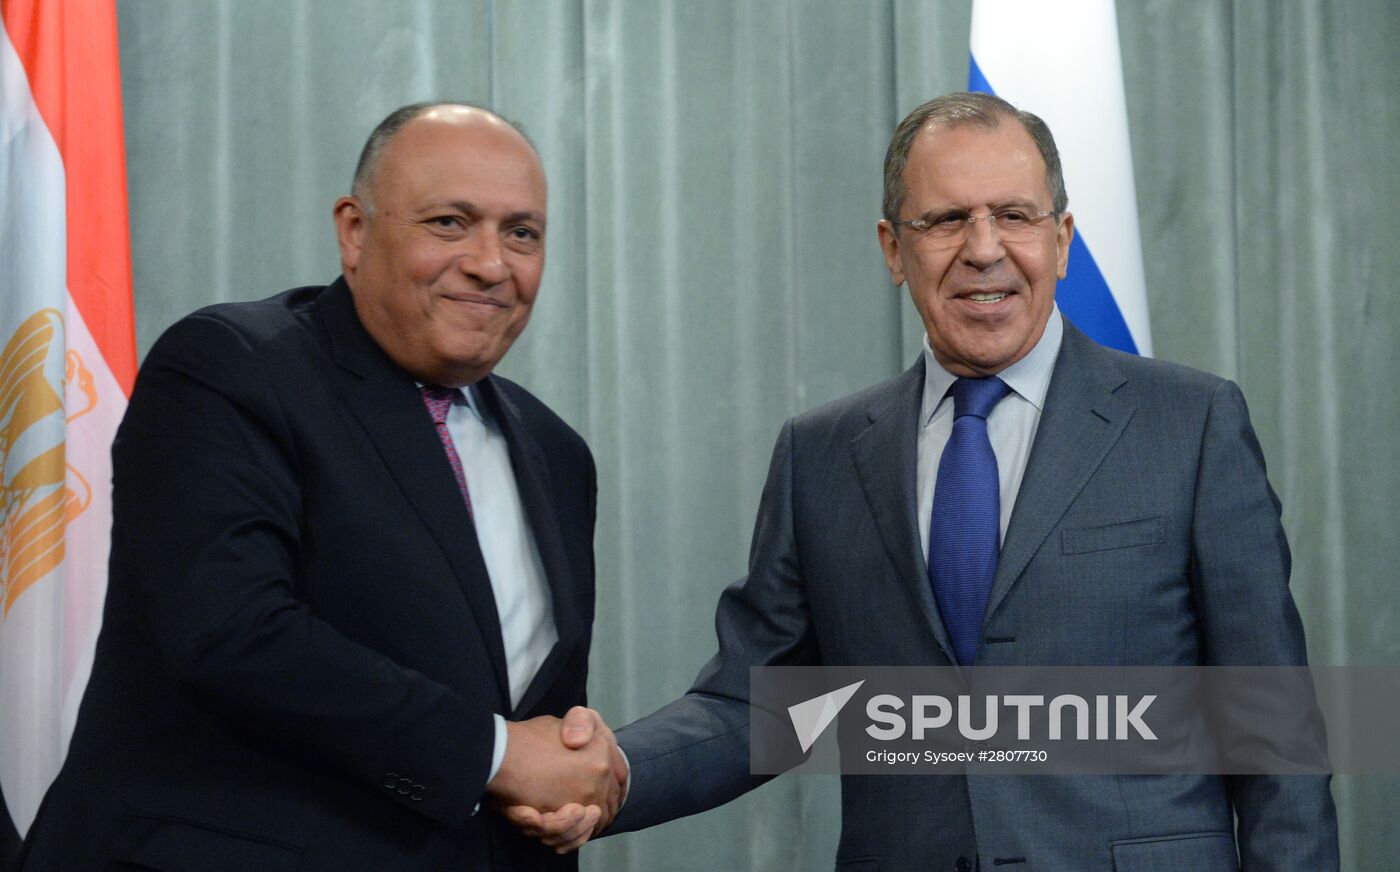 Russian Foreign Minister Sergey Lavrov meets with Egyptian Foreign Minister Sameh Shoukry